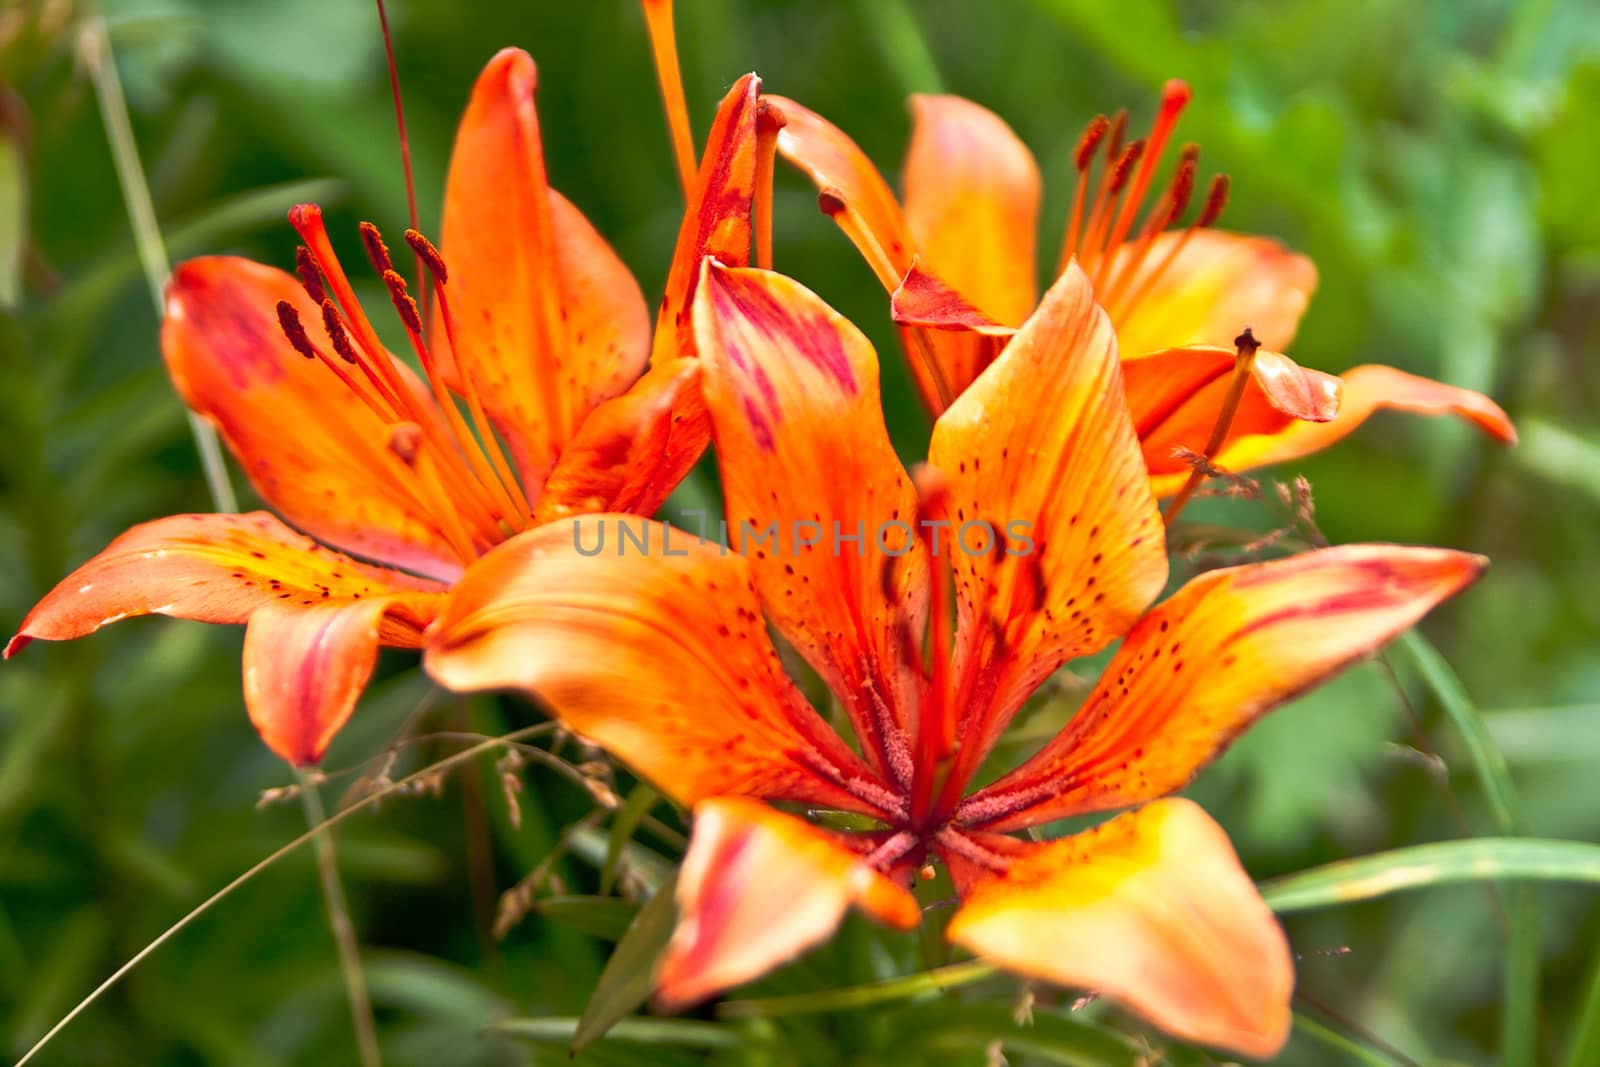 Lilies bloom in the garden on a green background of the rest of the vegetation